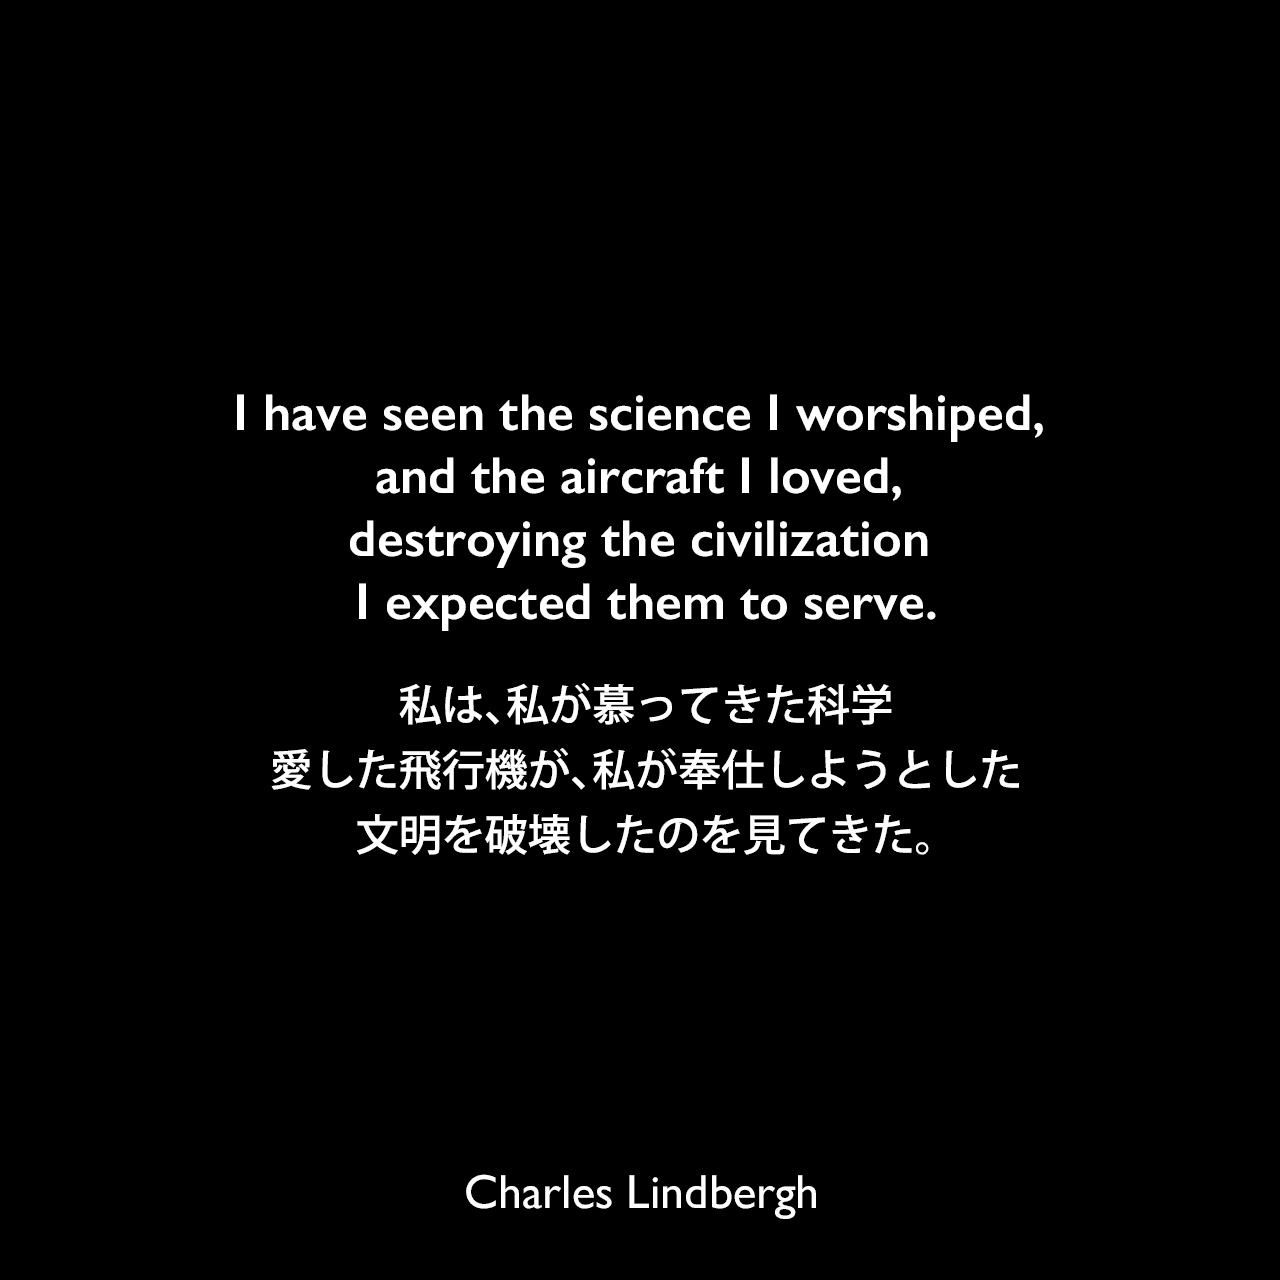 I have seen the science I worshiped, and the aircraft I loved, destroying the civilization I expected them to serve.私は、私が慕ってきた科学、愛した飛行機が、私が奉仕しようとした文明を破壊したのを見てきた。Charles Lindbergh